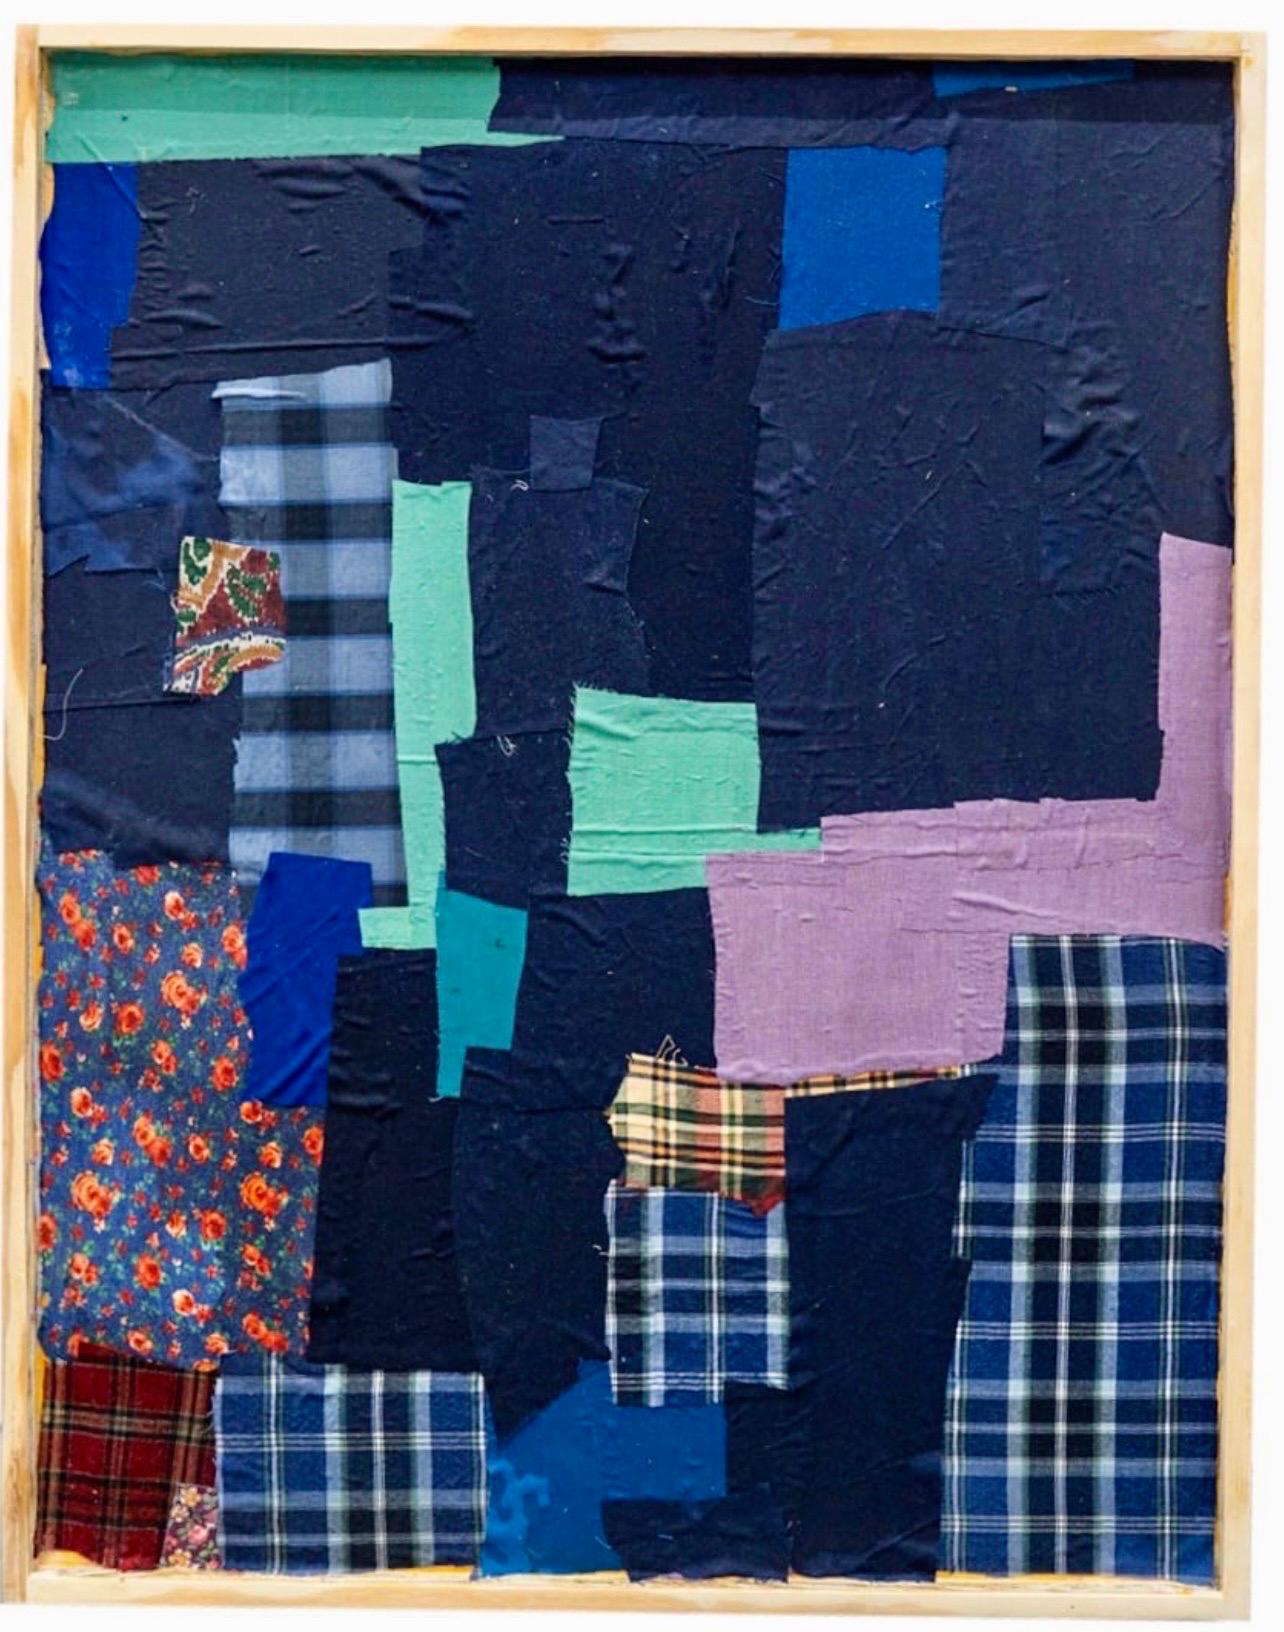 Yanira Collado (Dominican, American, 1975 ) 
"Que Ya Estan En El Olvido" 
Mixed Media unique fabric and painting assemblage collage on plywood 
Textile, clothing and found material on a custom-made frame. 
COA signed by the artist on